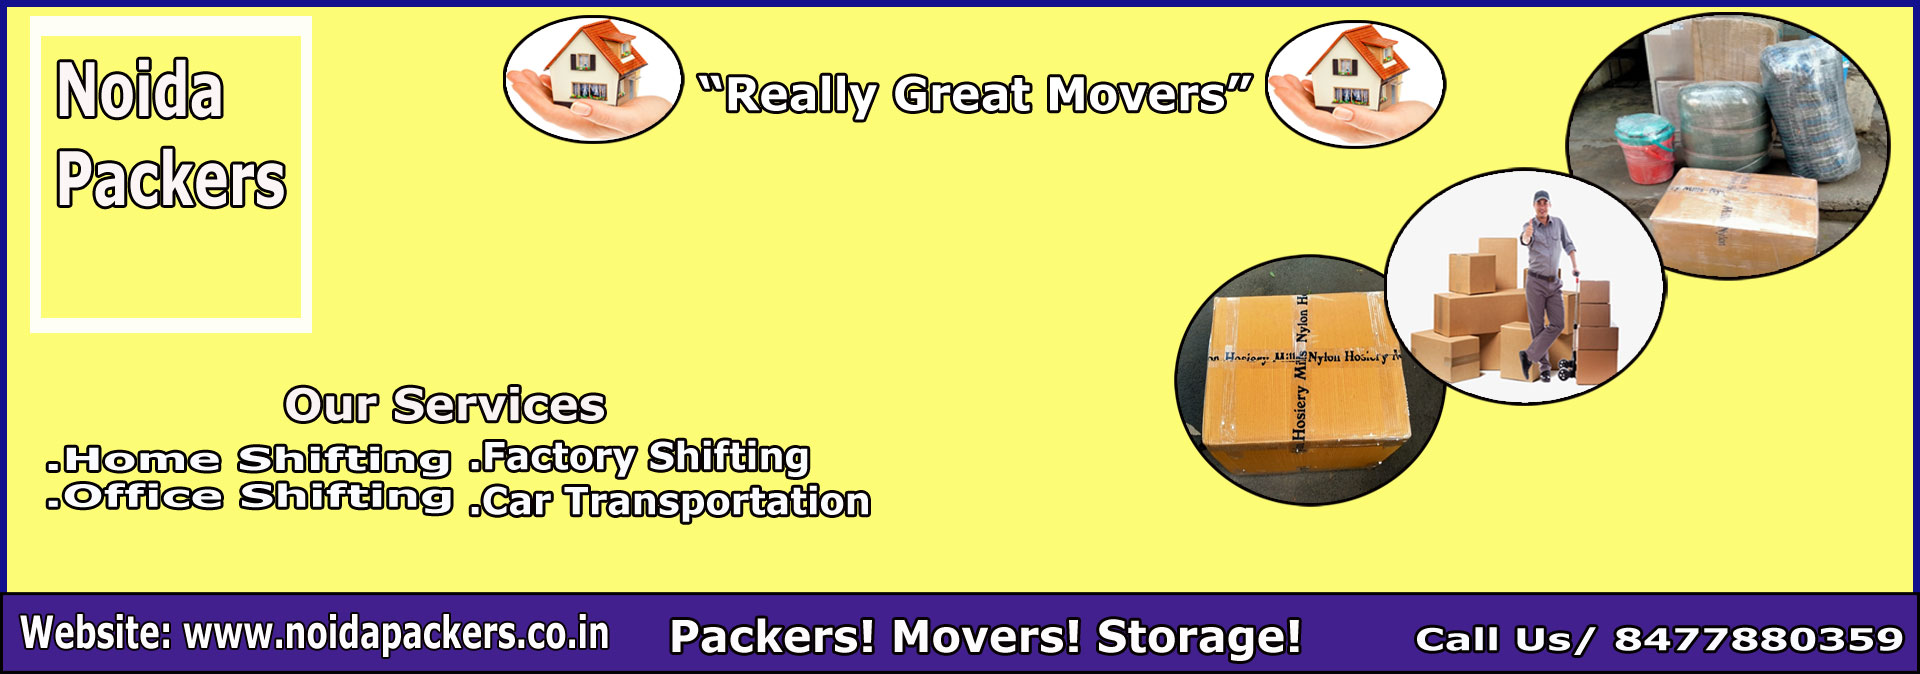 Movers ande Packers Noida Sector 166